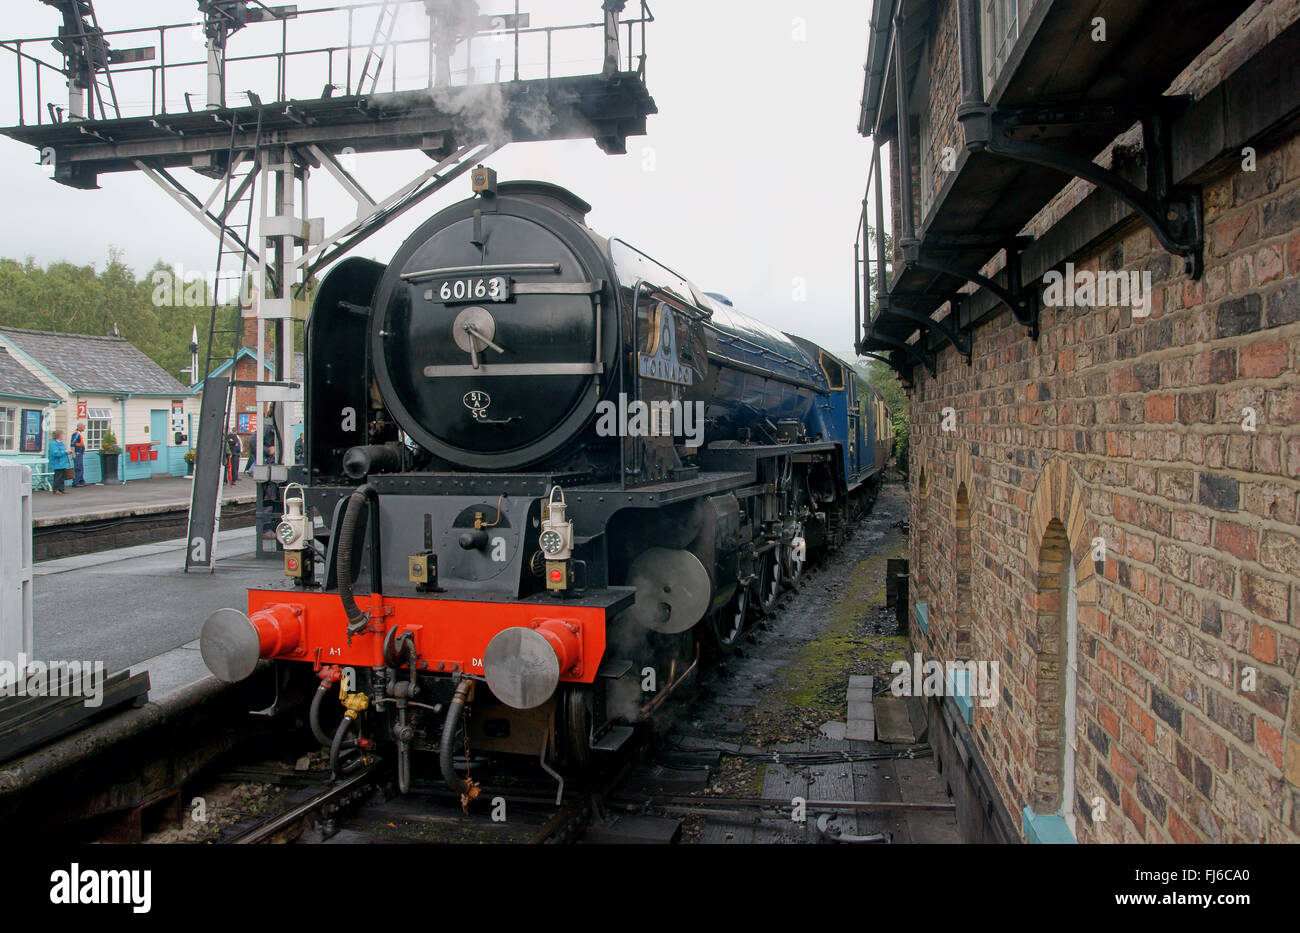 Tornado steam locomotive in BR blue at Grosmont Station on North York Moors Railway, front view Stock Photo